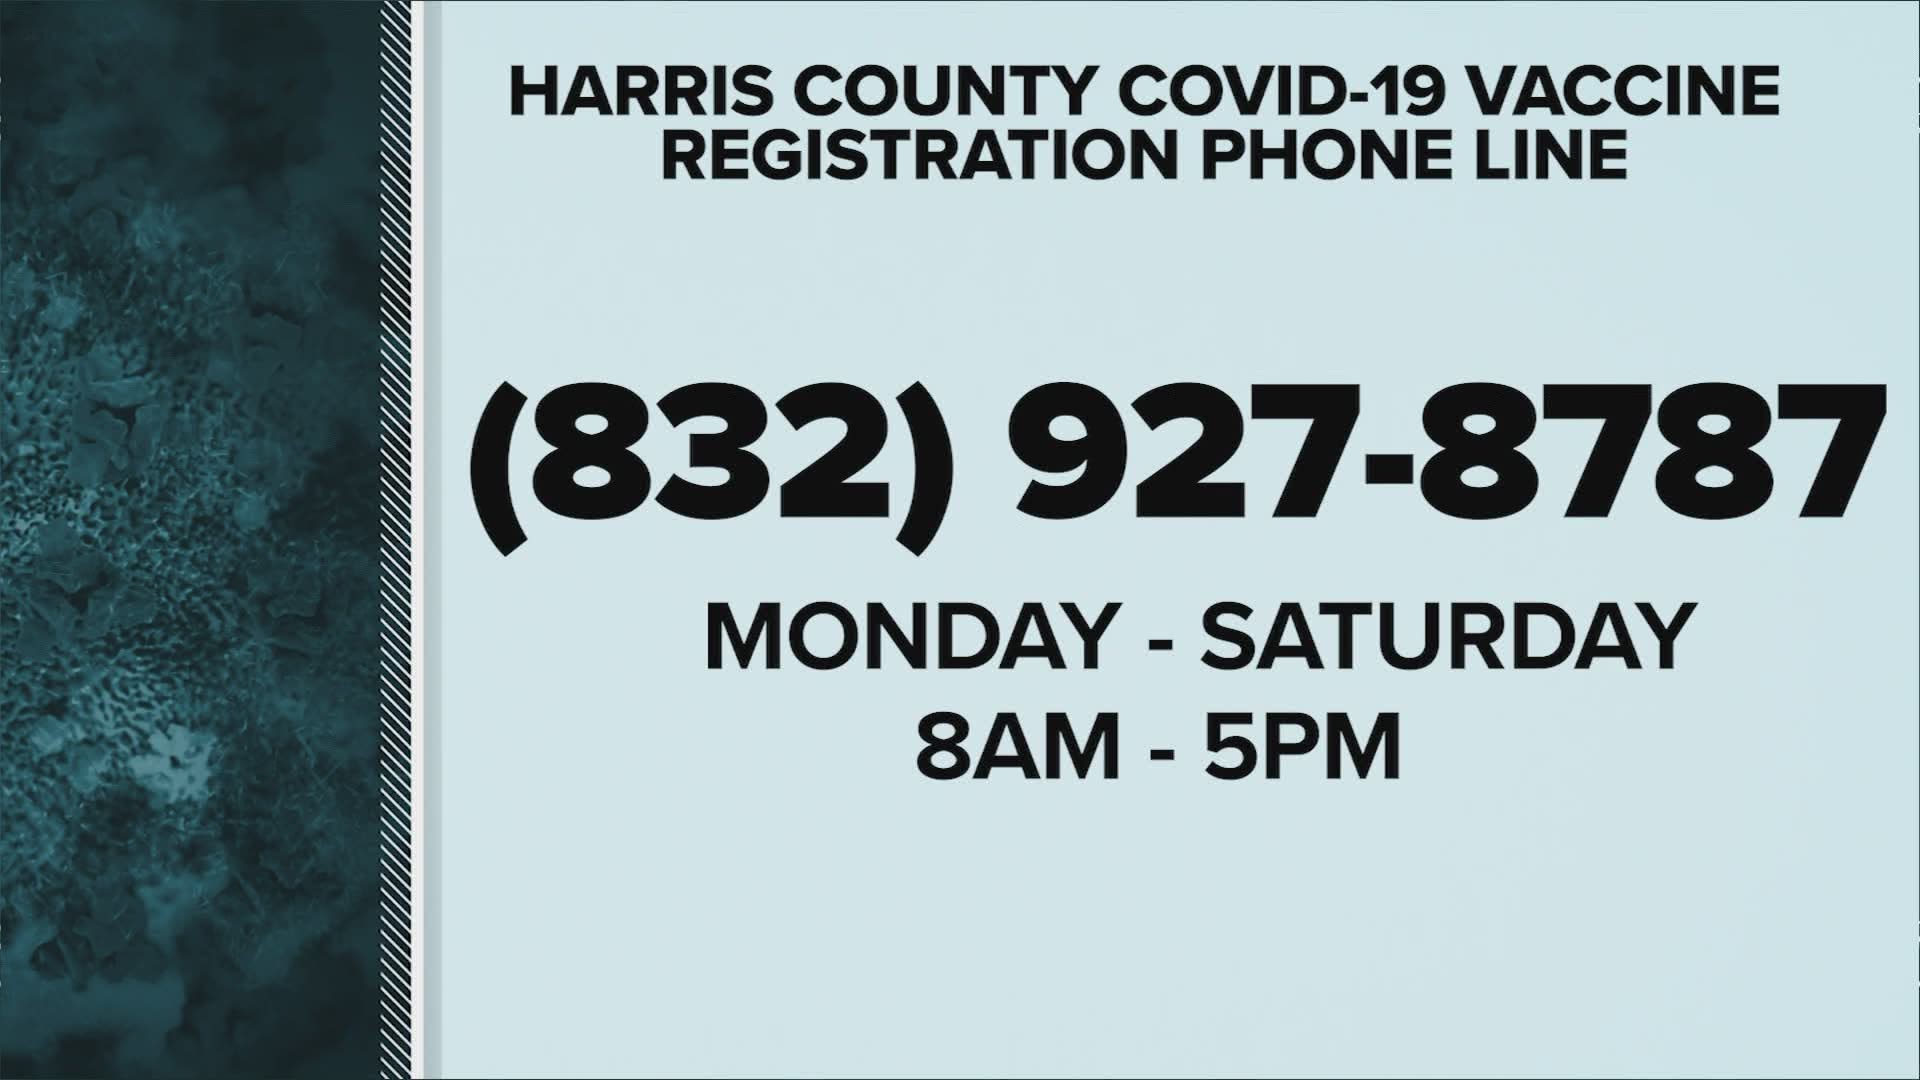 Here are some tips on how to get registered for the COVID-19 vaccine in Harris County as well as surrounding counties.